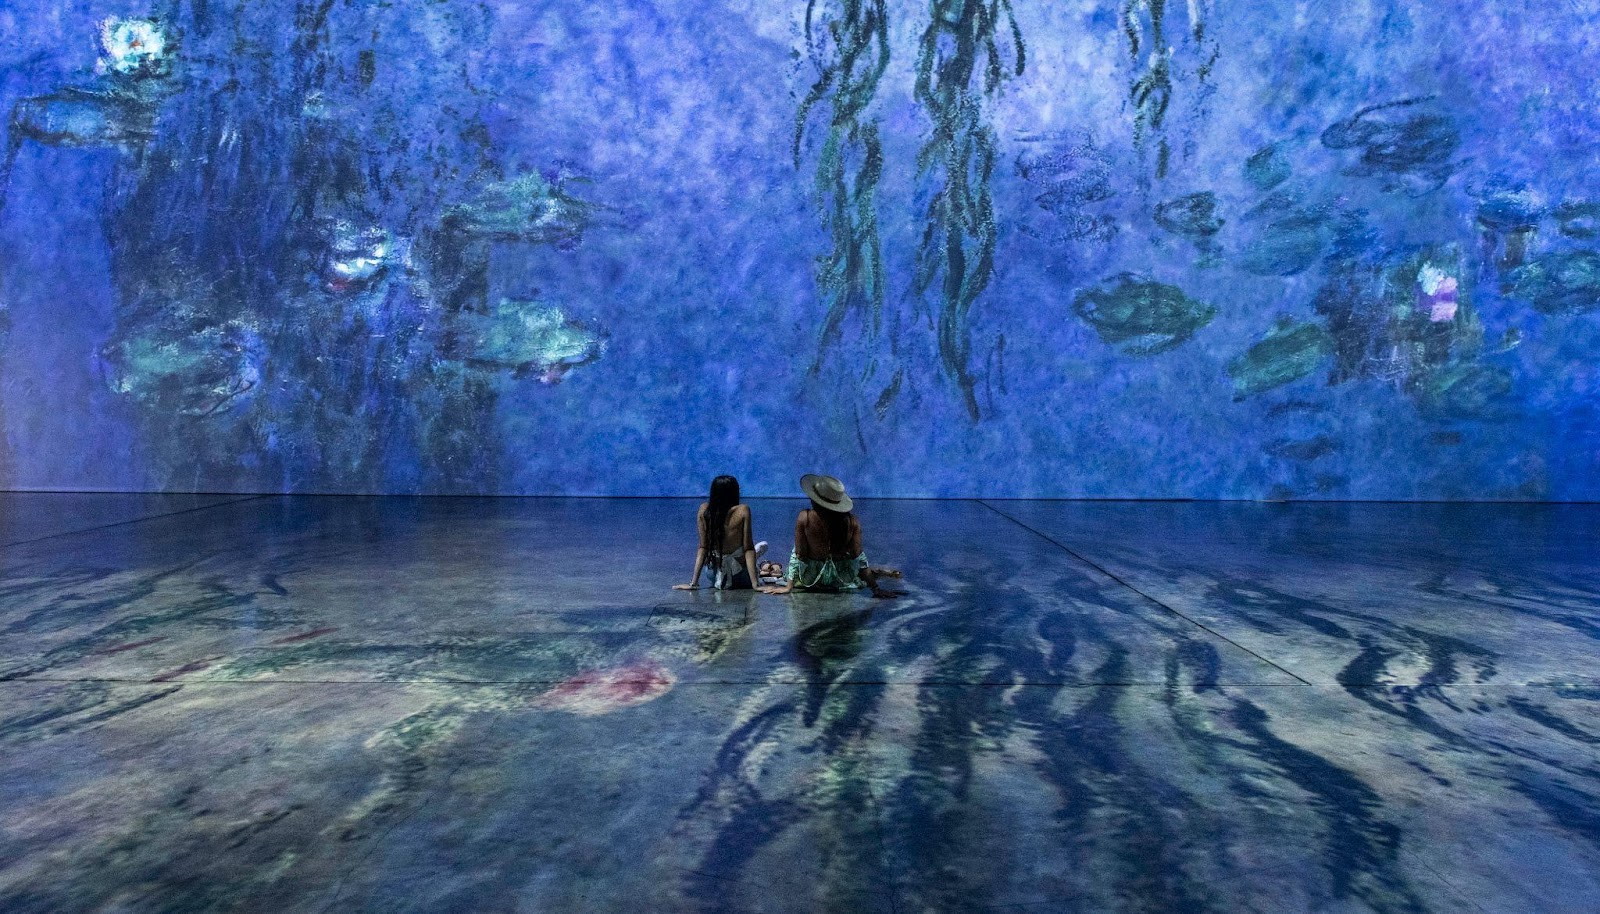 Beyond Monet: The Immersive Experience Offers Free Admission to Veterans